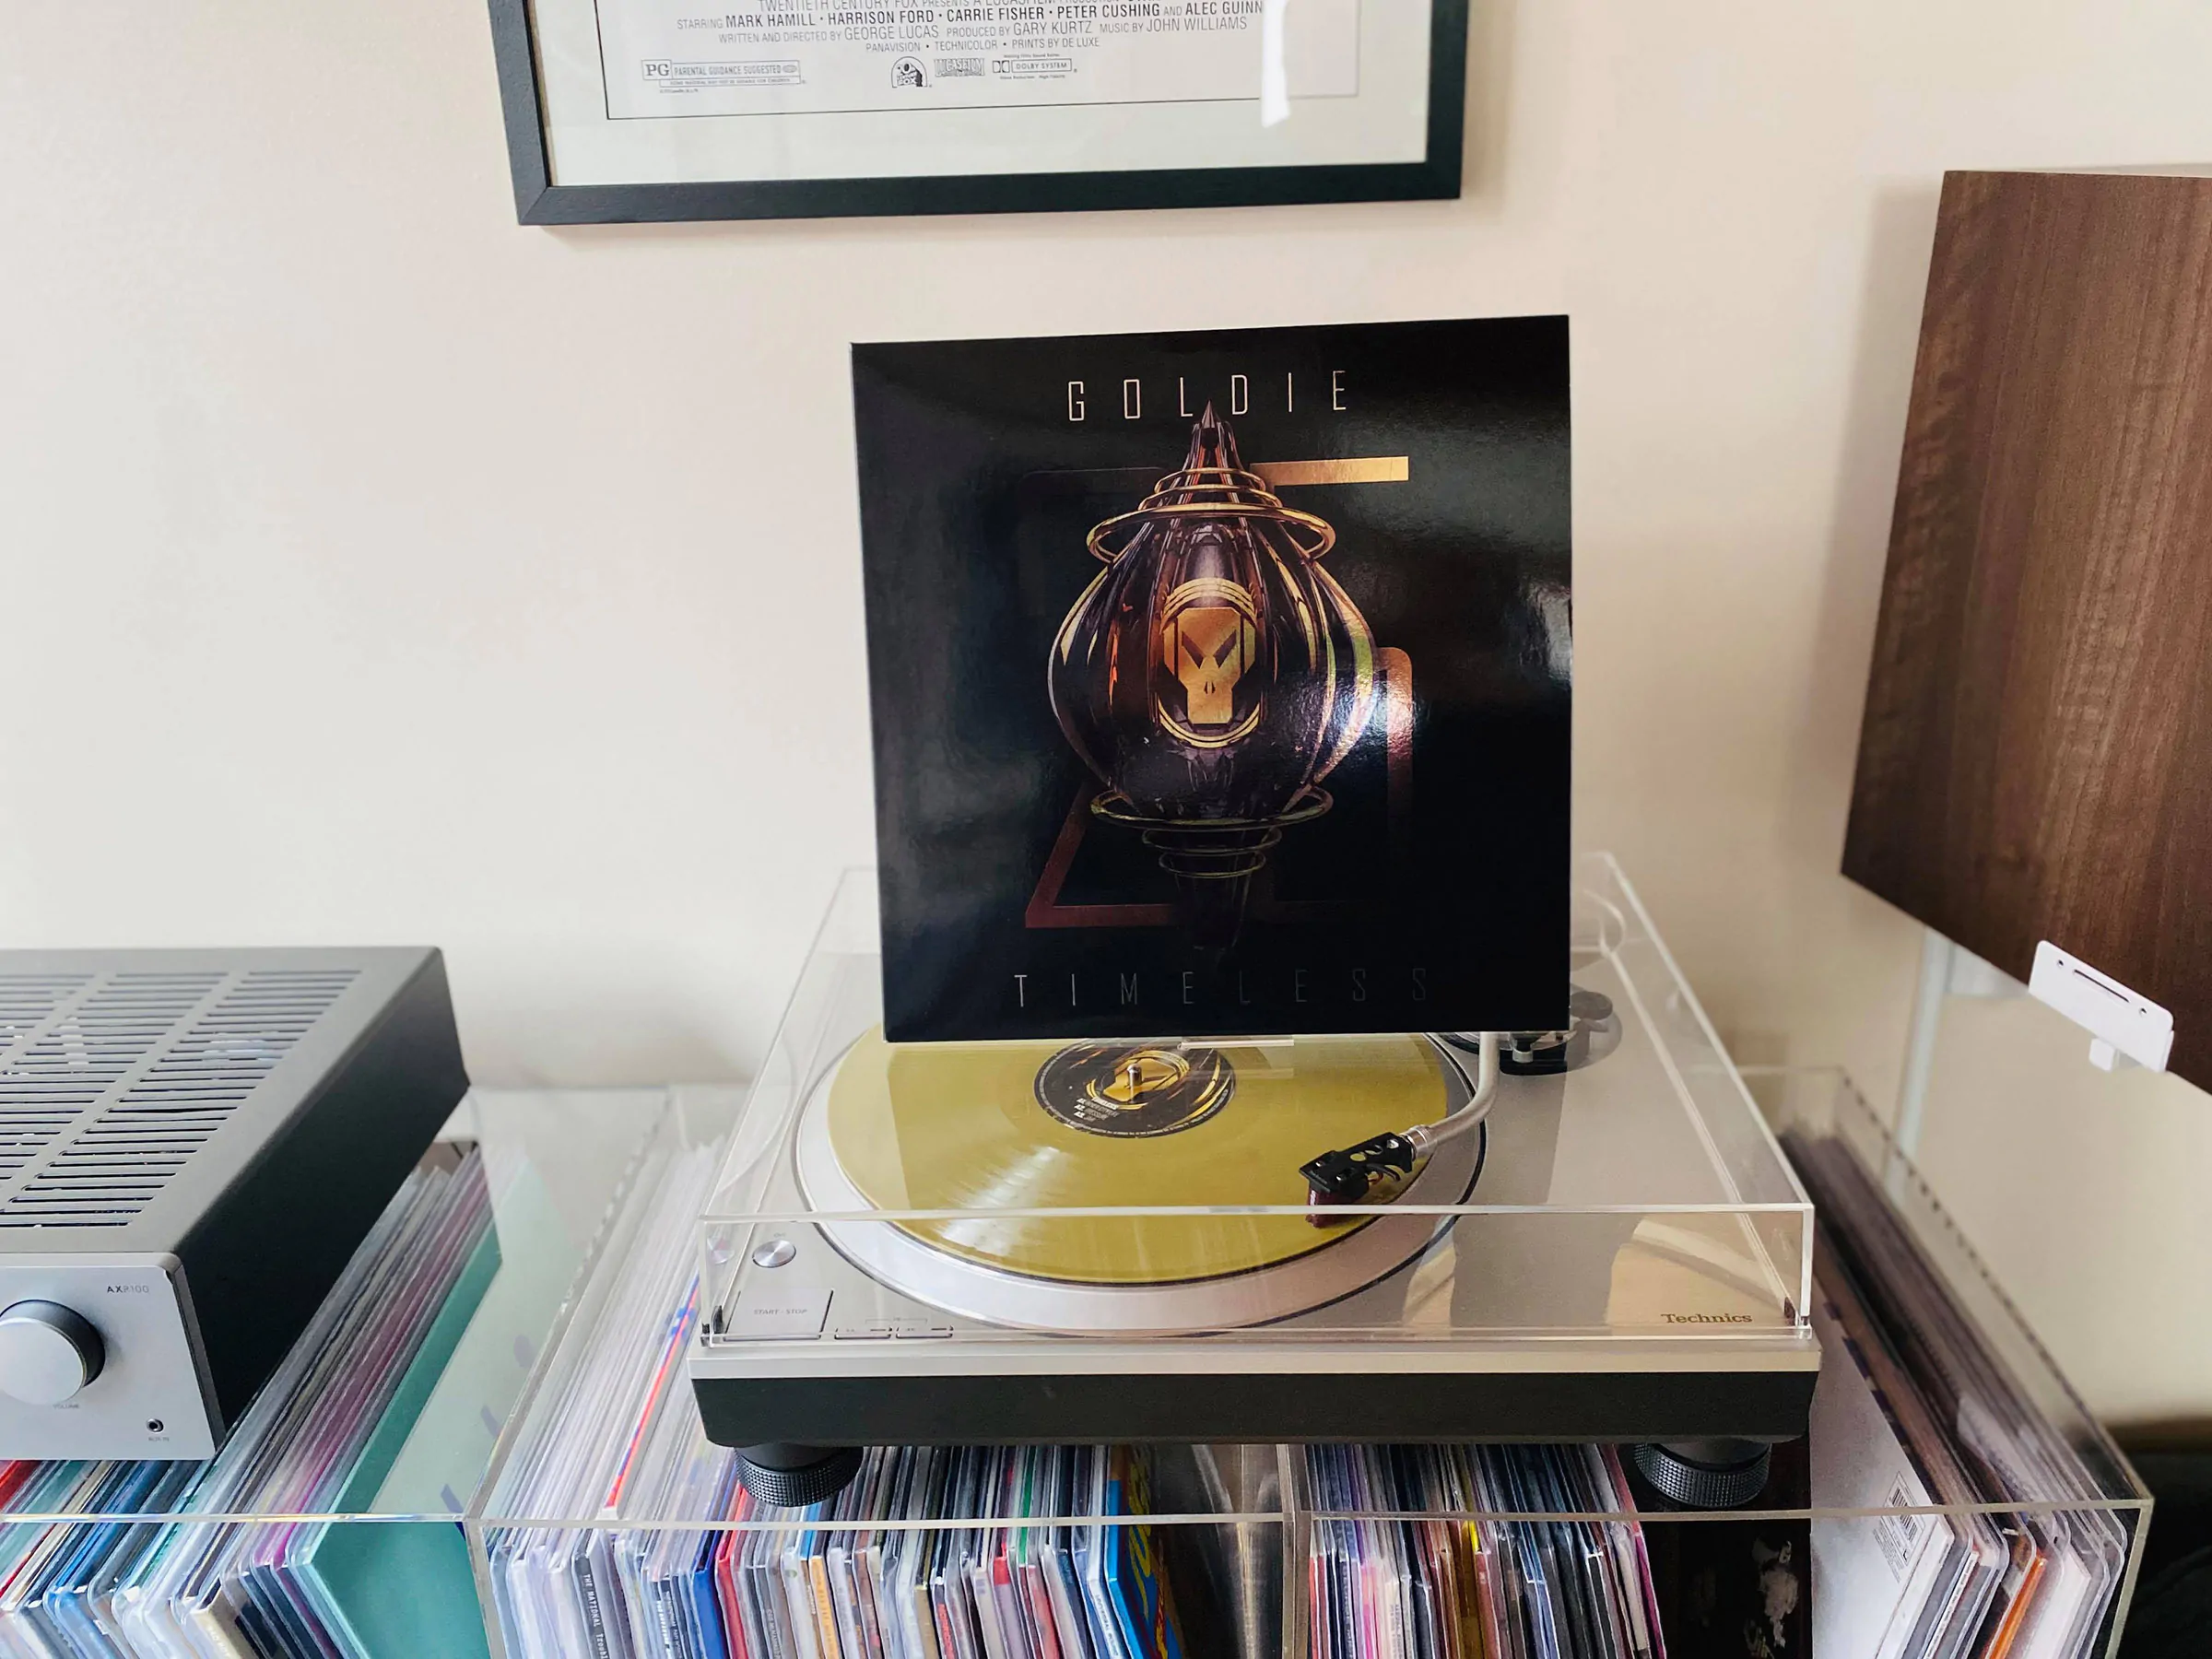 ON THE TURNTABLE: Goldie - Timeless 